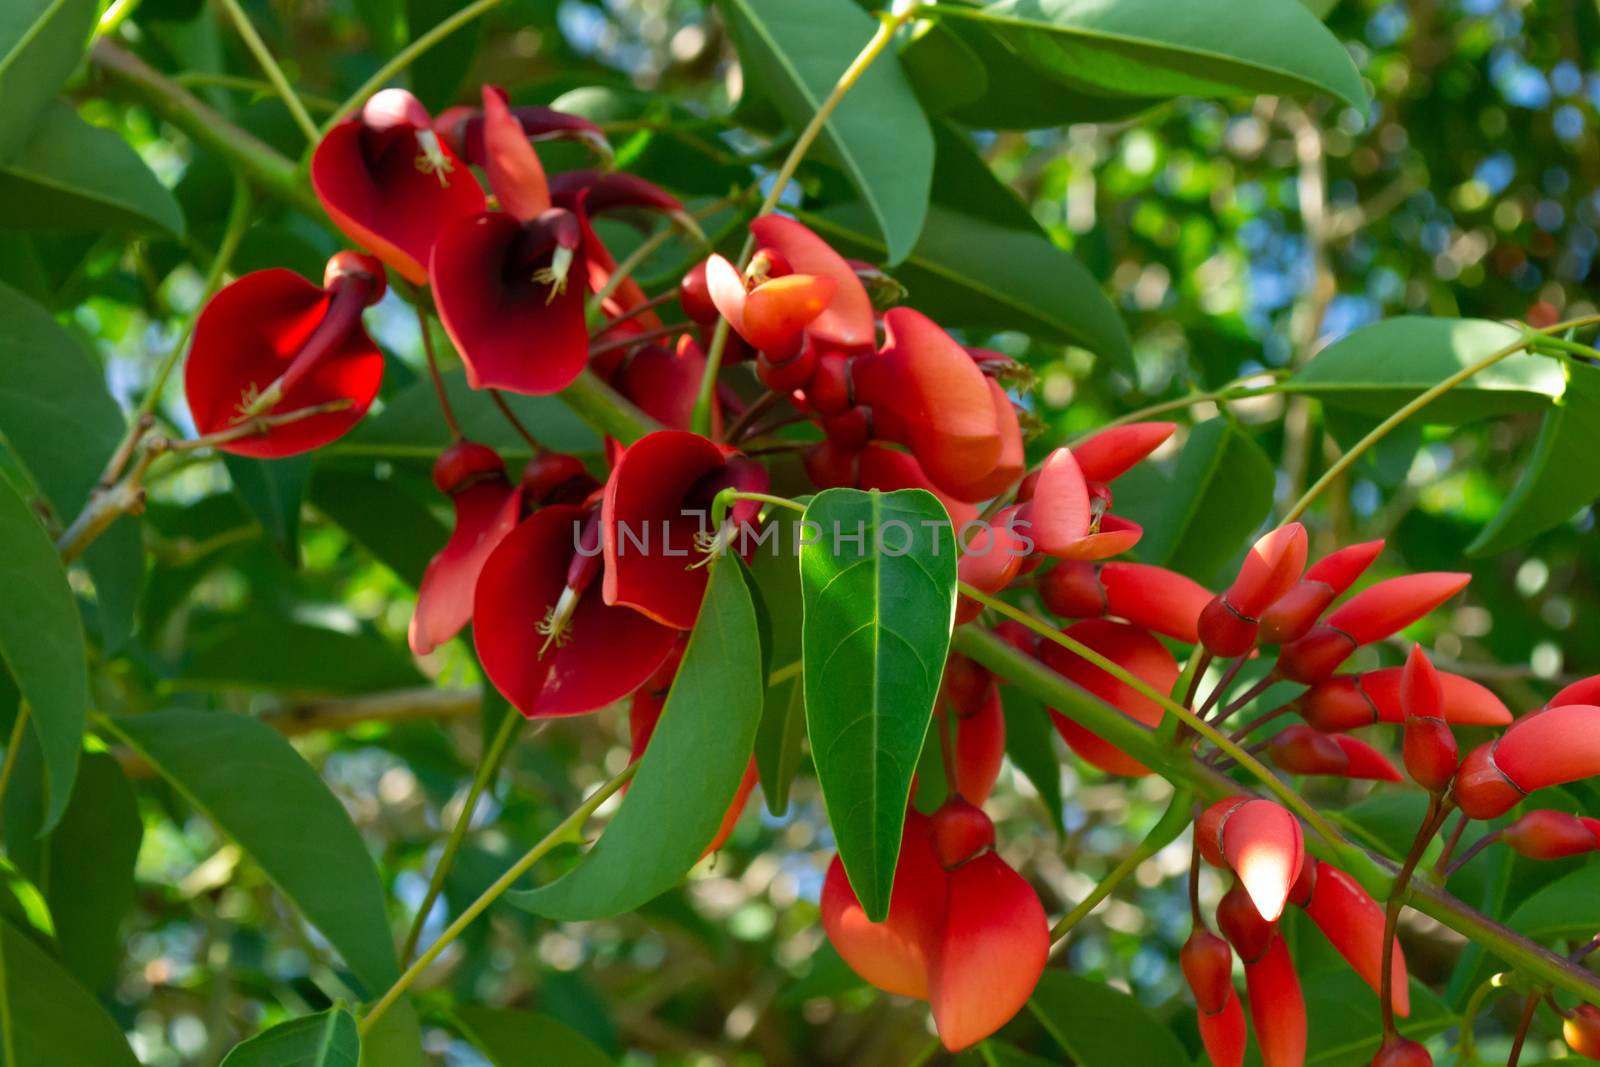 Close up of a tree with red flowers - erythrina crista-galli also known as  a coral tree and a flame tree. Stock image.